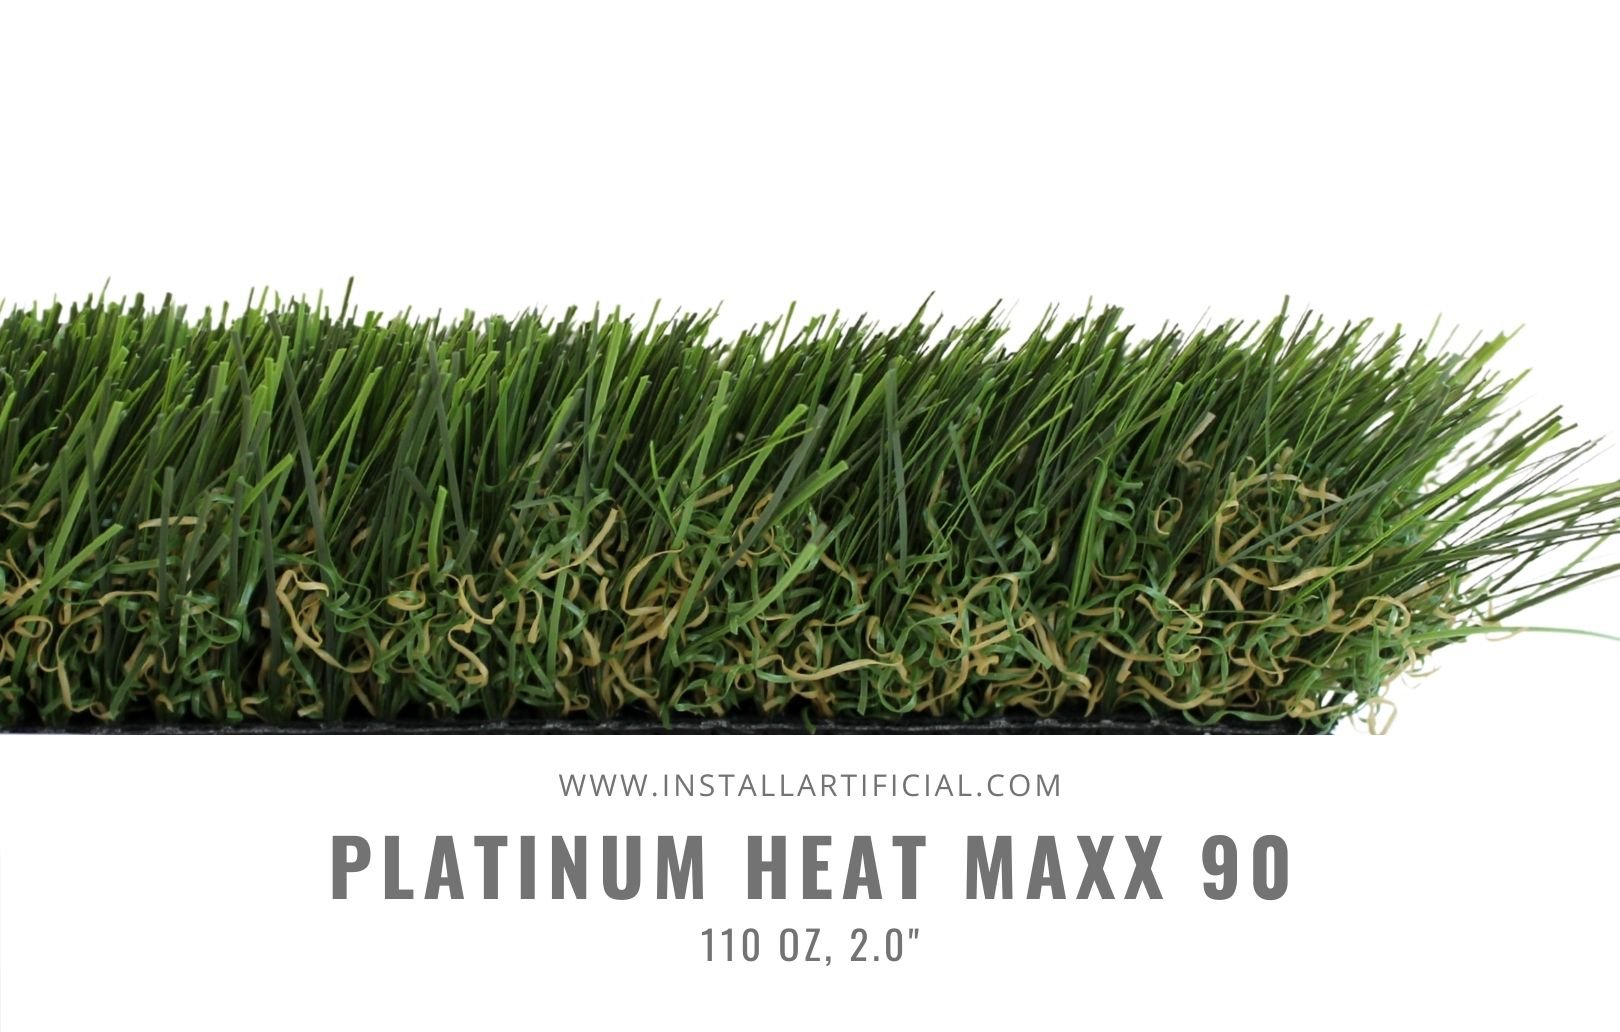 Platinum Heat Maxx 90, Imperial Synthetic Turf, side